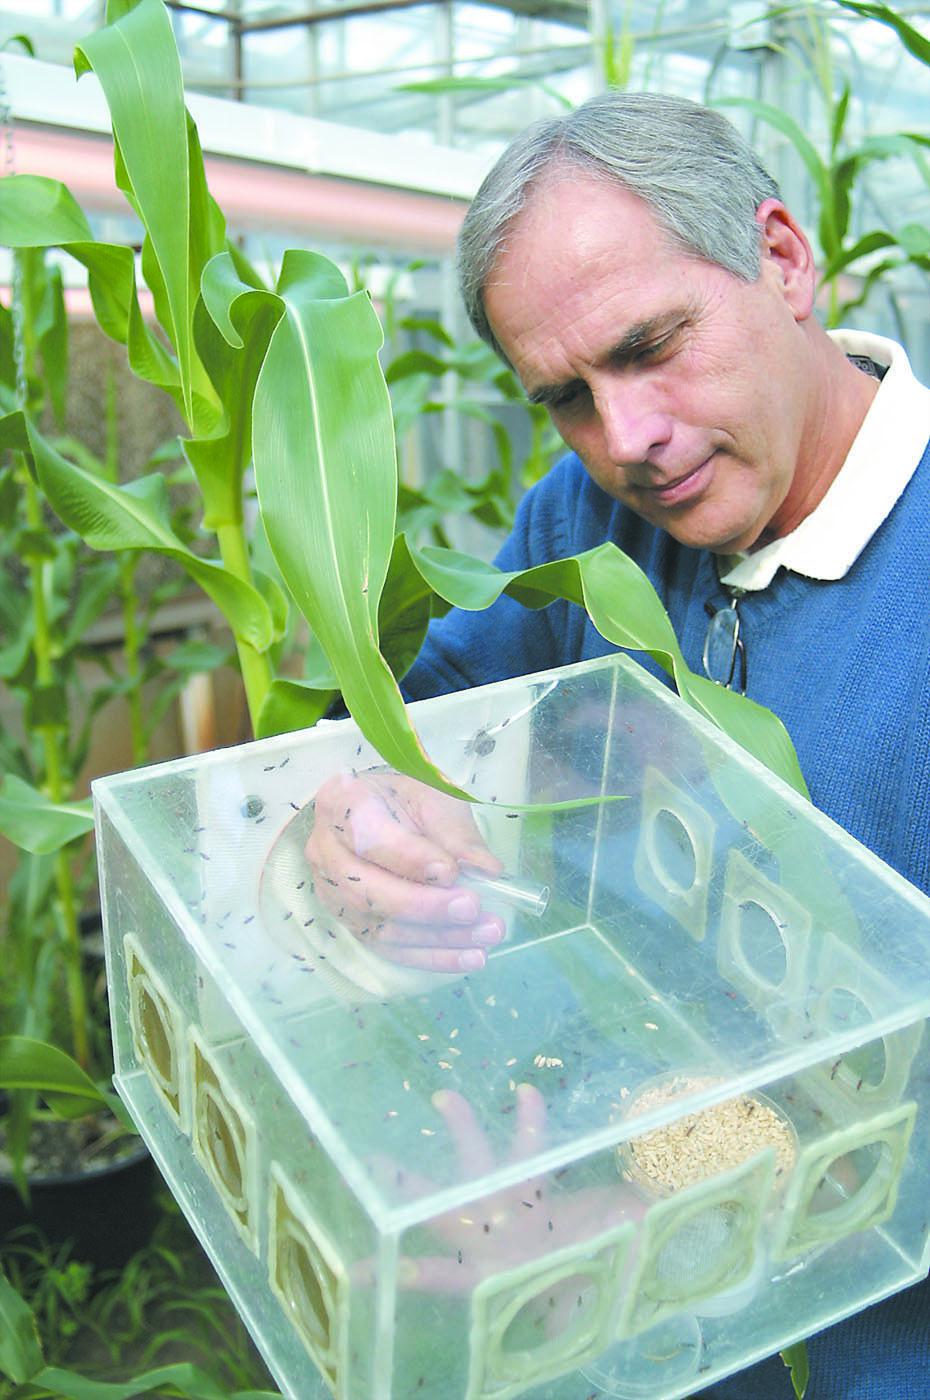 Mississippi State University entomology alumnus Joe Lewis conducted research with parasitic wasps as part of a cooperative United States Department of Agriculture-Agricultural Research Service project to investigate plant response to insect attacks. (Photo courtesy of Tifton Gazette, Georgia/Paula Stuhr)